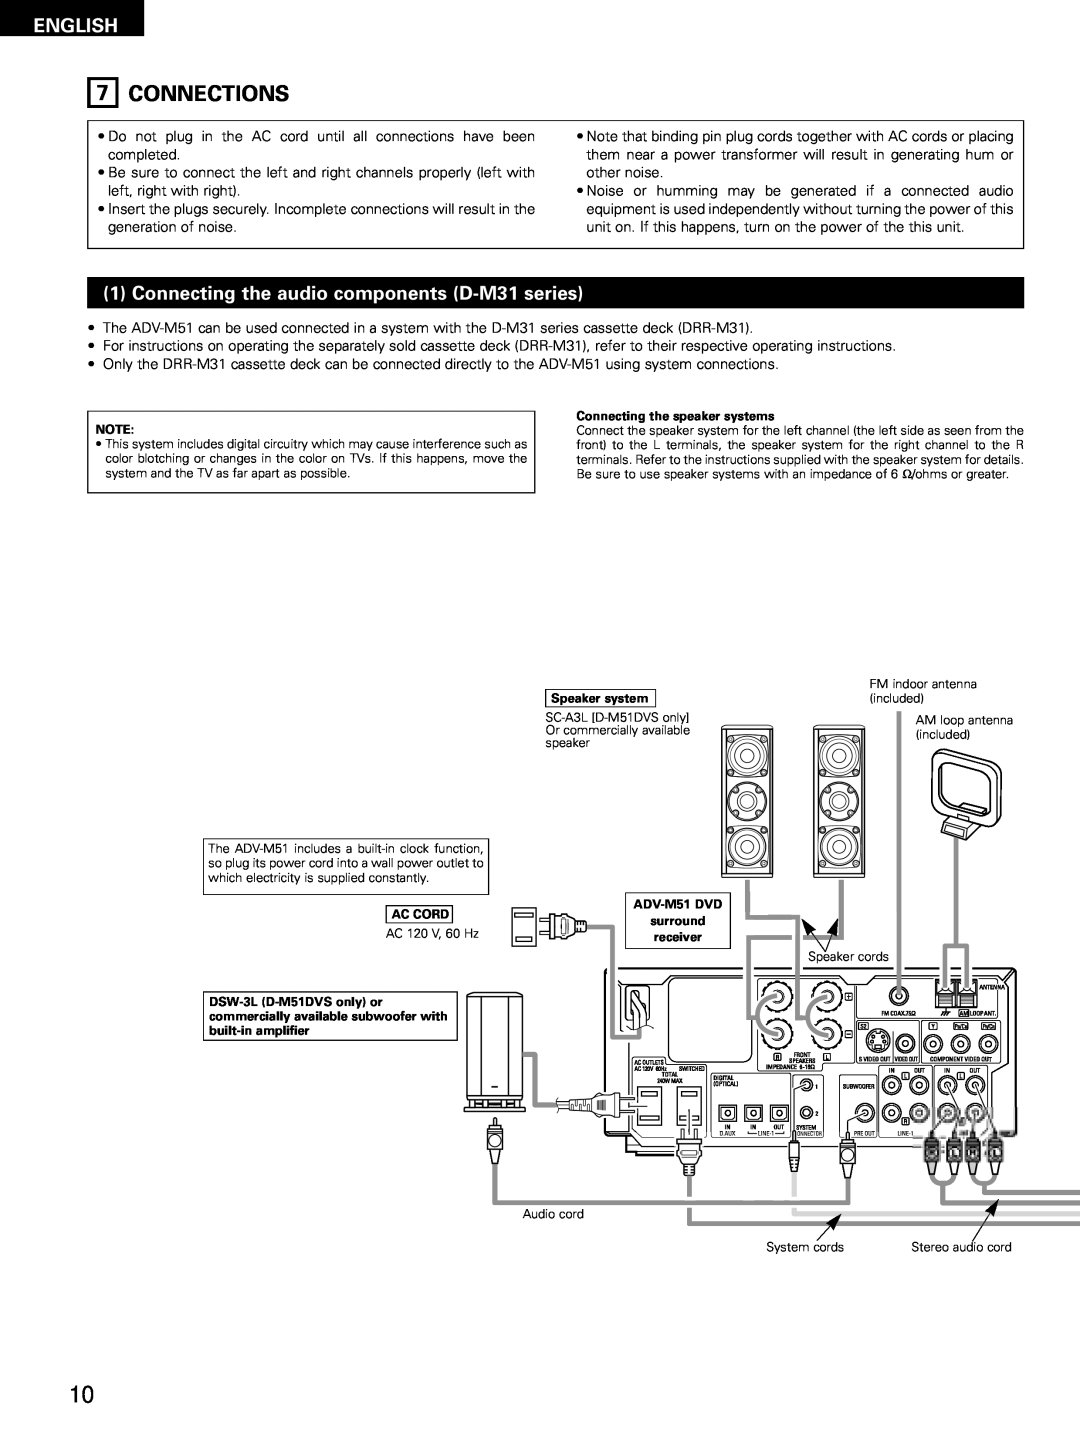 Denon D-M51DVS, ADVM51, ADV-M51 manual Connections, Connecting the audio components D-M31series, English 